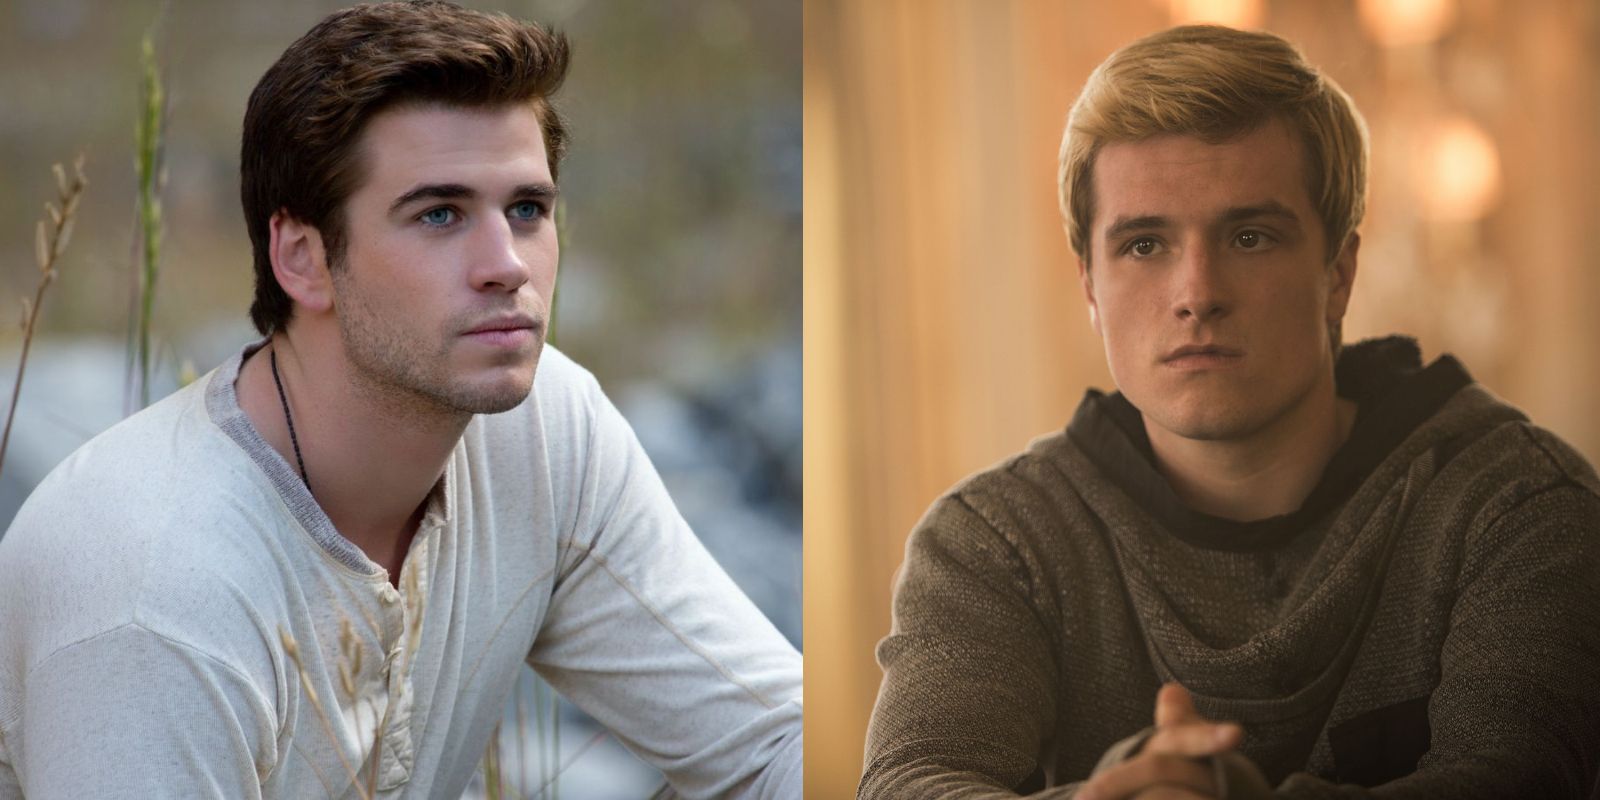 Gale And Peeta Could Have Formed A Connection